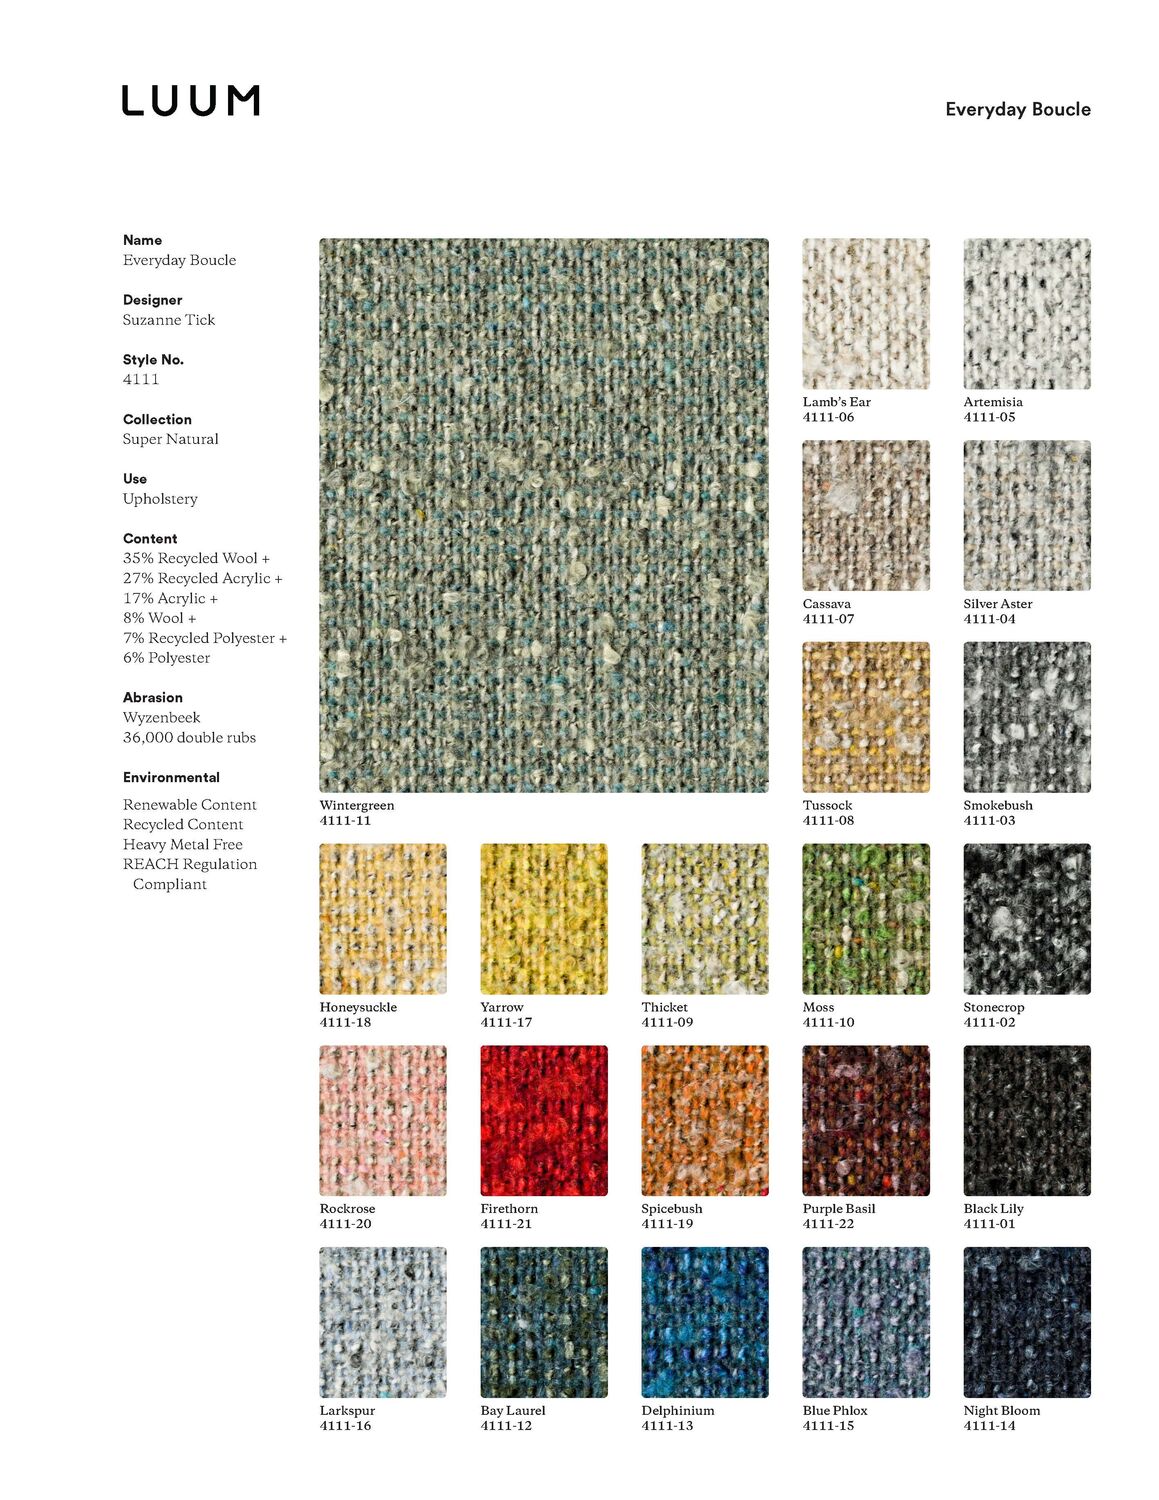 Everyday Boucle - Moss - 4111 - 10 Sample Card